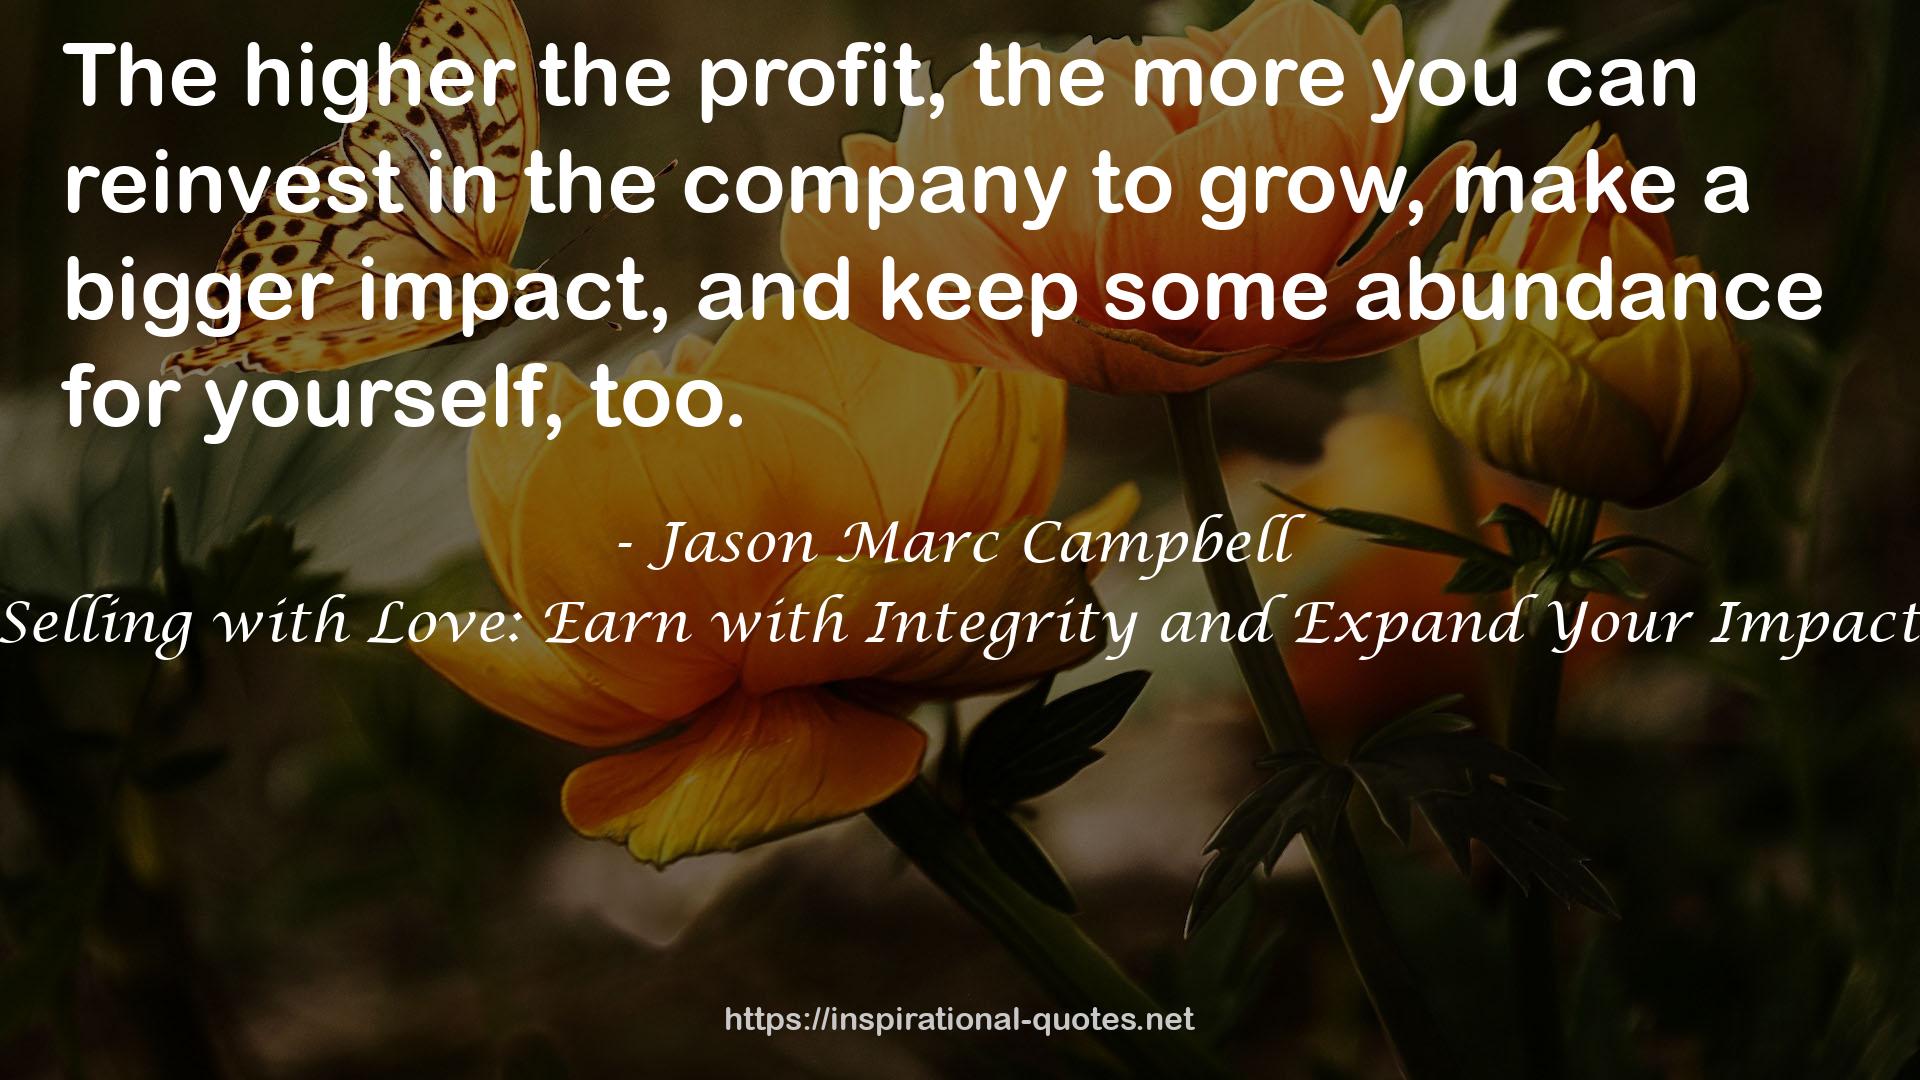 Jason Marc Campbell QUOTES